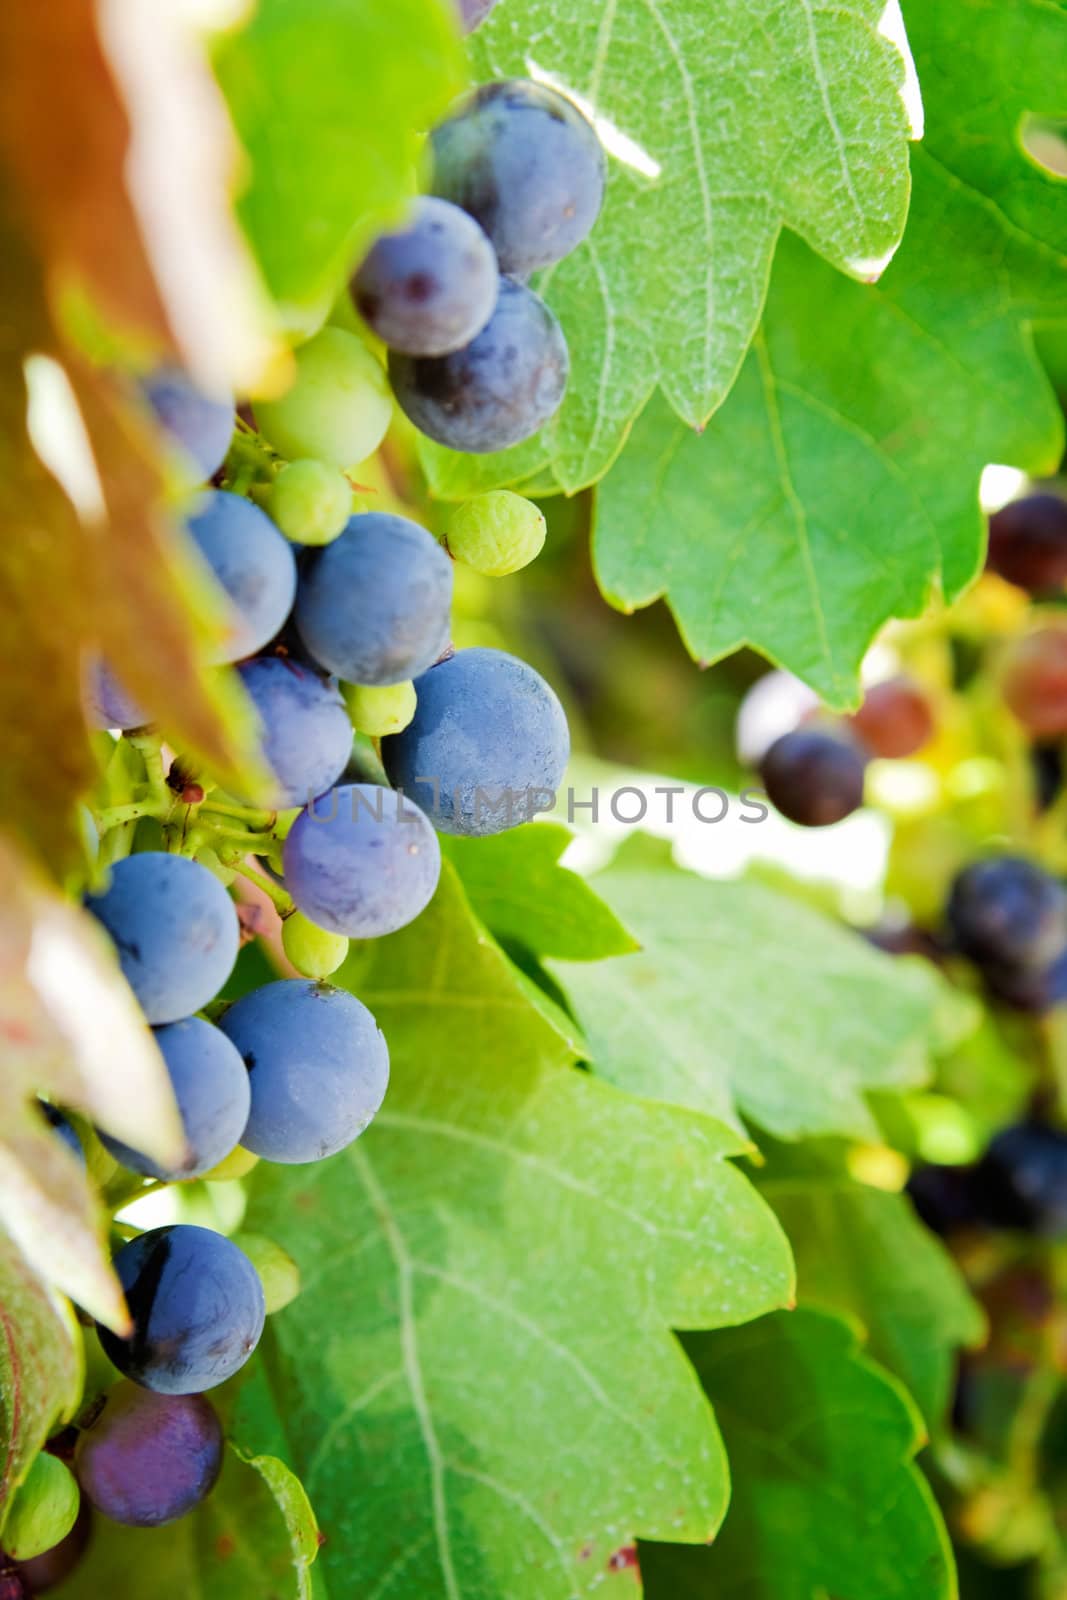 Close up image of bunch of grapes